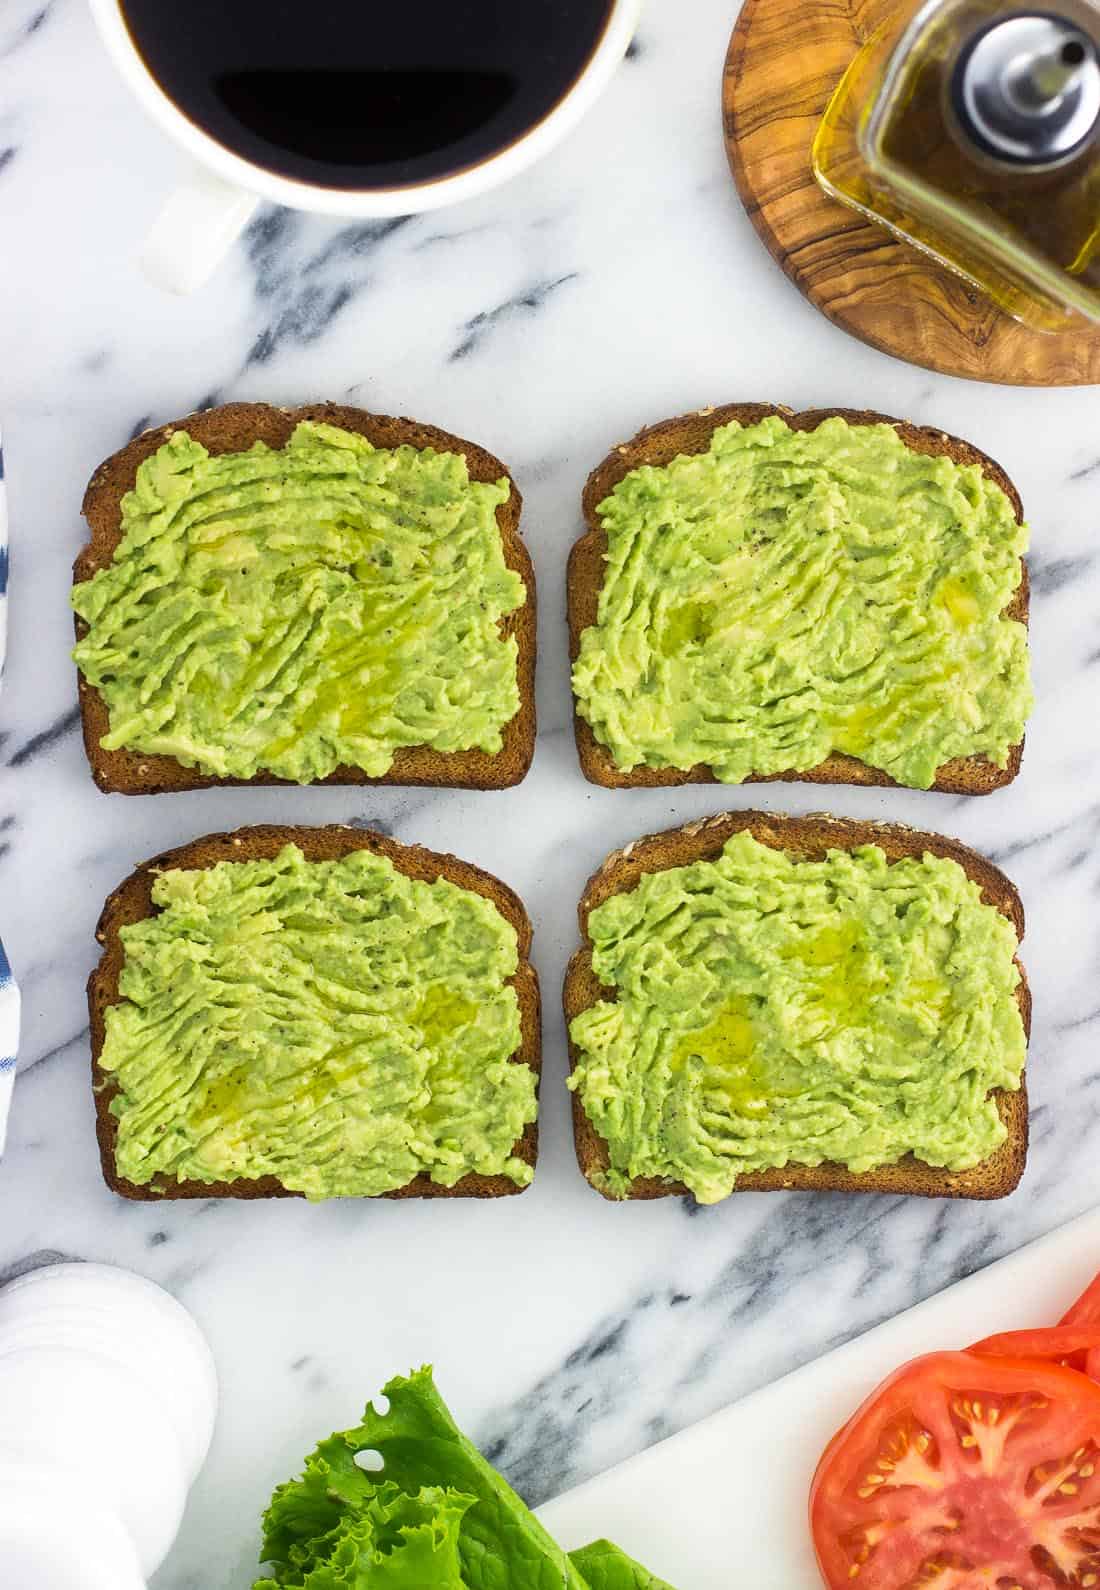 Four slices of avocado toast before adding toppings